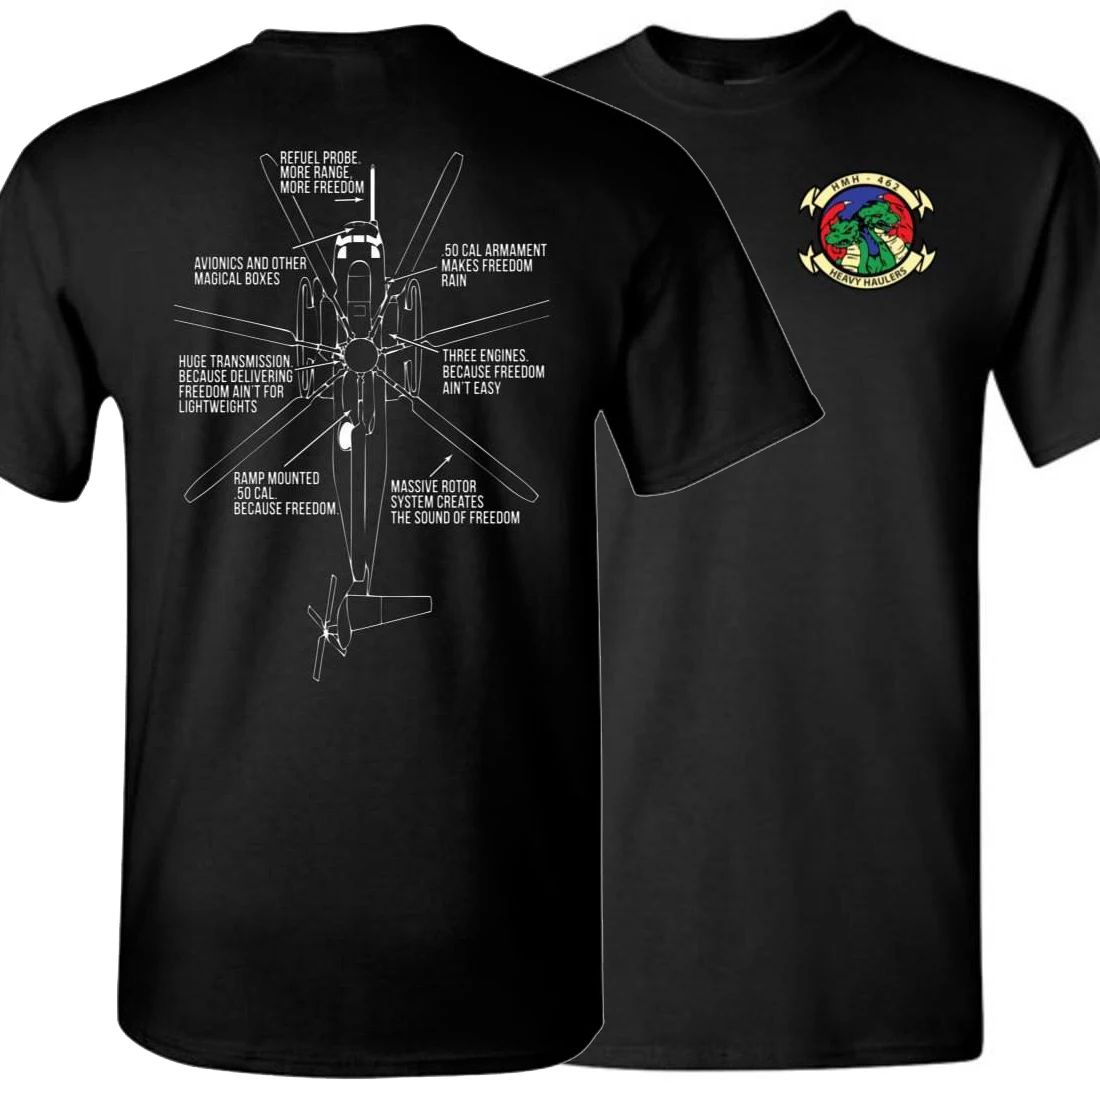 

HMH-462 Squadron CH-53 Super Stallion Transport Helicopter T-Shirt. Summer Cotton Short Sleeve O-Neck Mens T Shirt New S-3XL